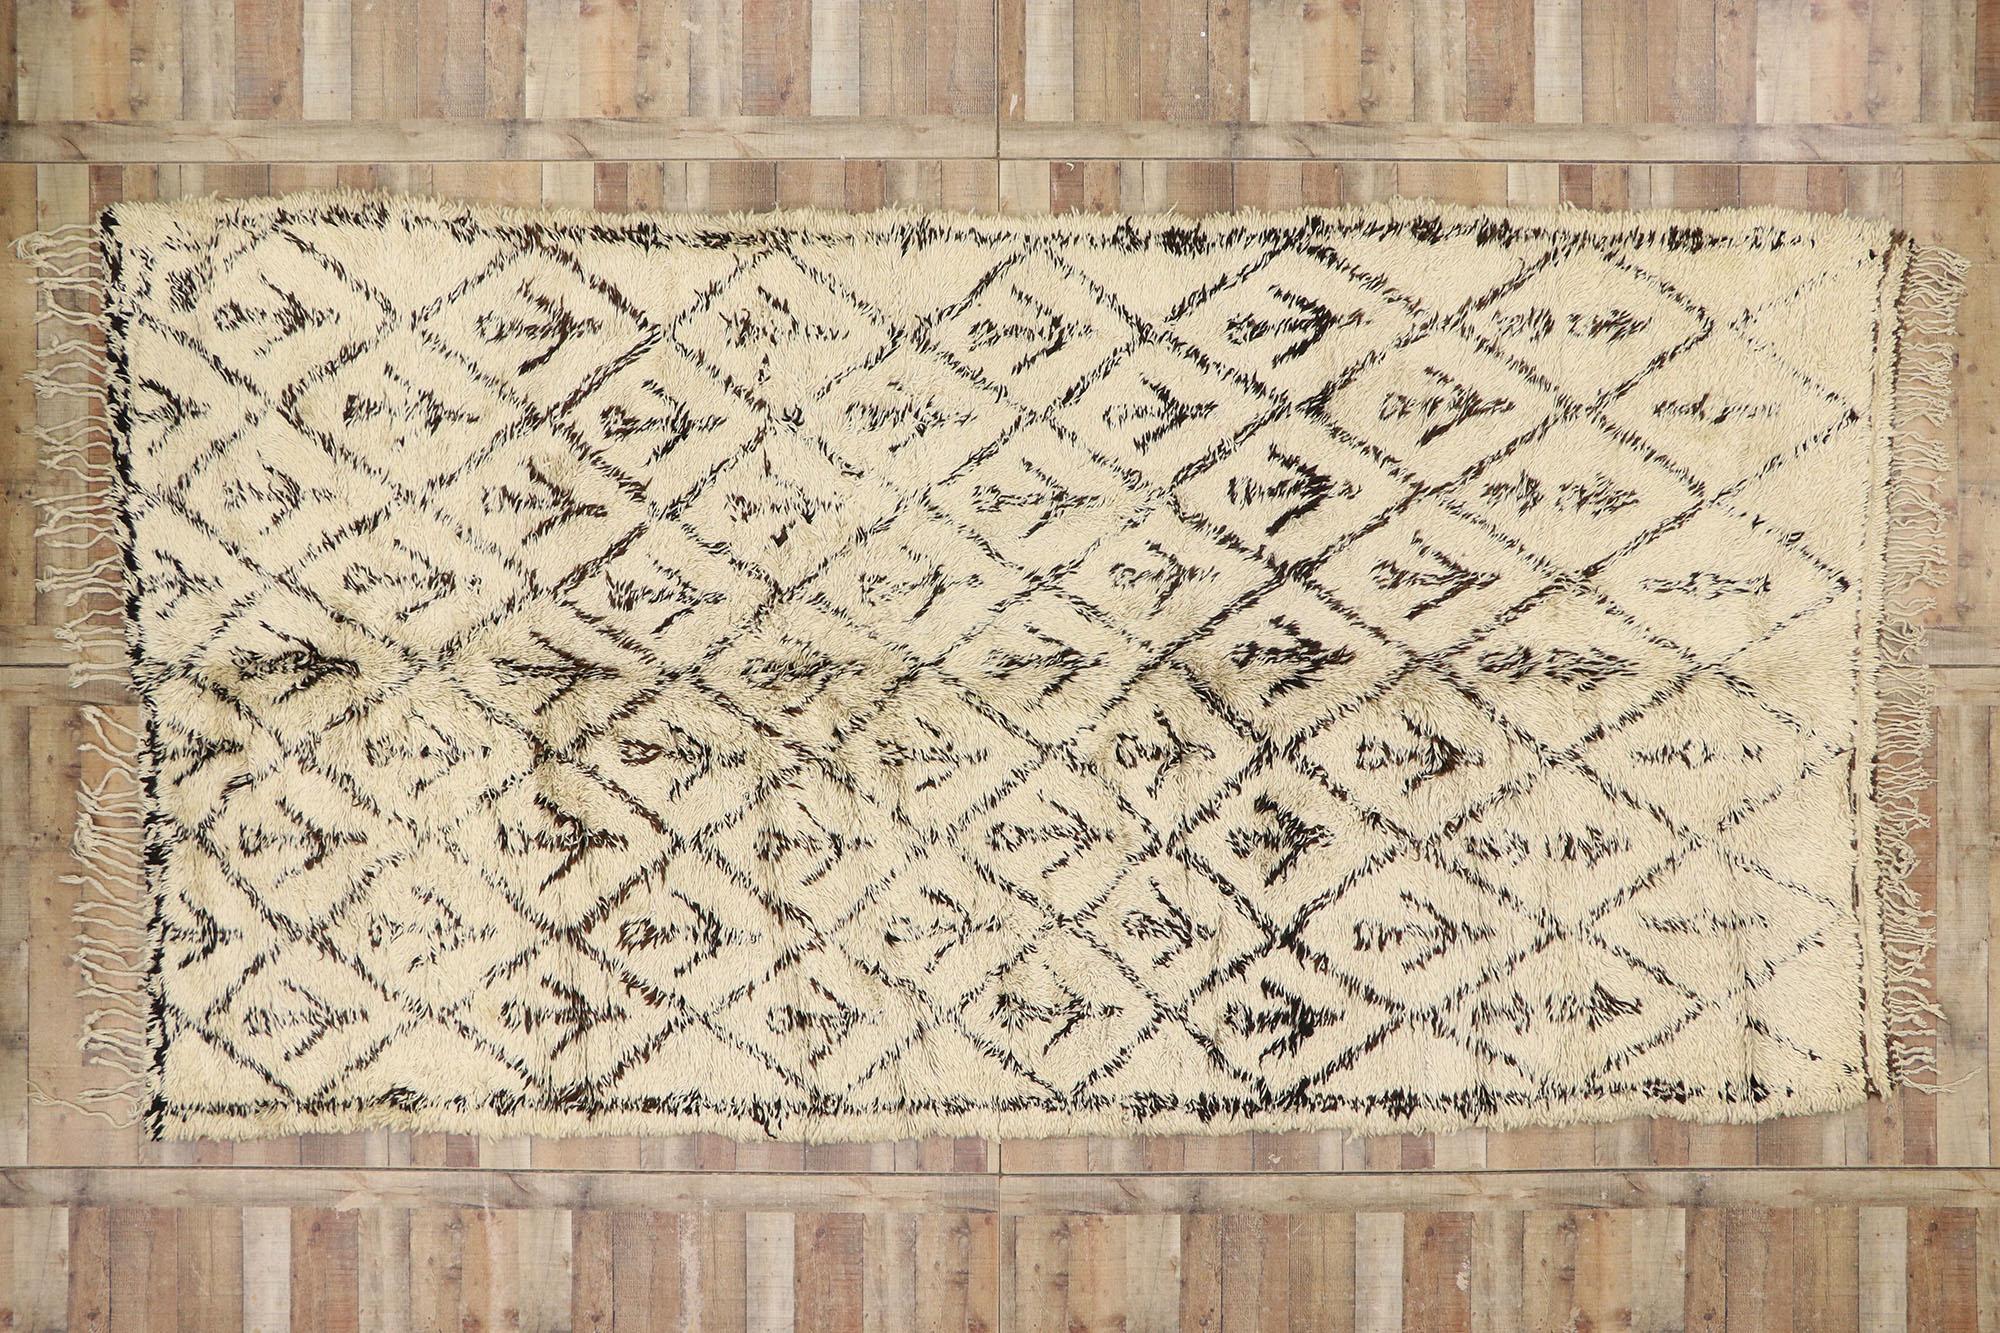 Vintage Berber Beni Ourain Moroccan Rug with Tribal Style For Sale 2